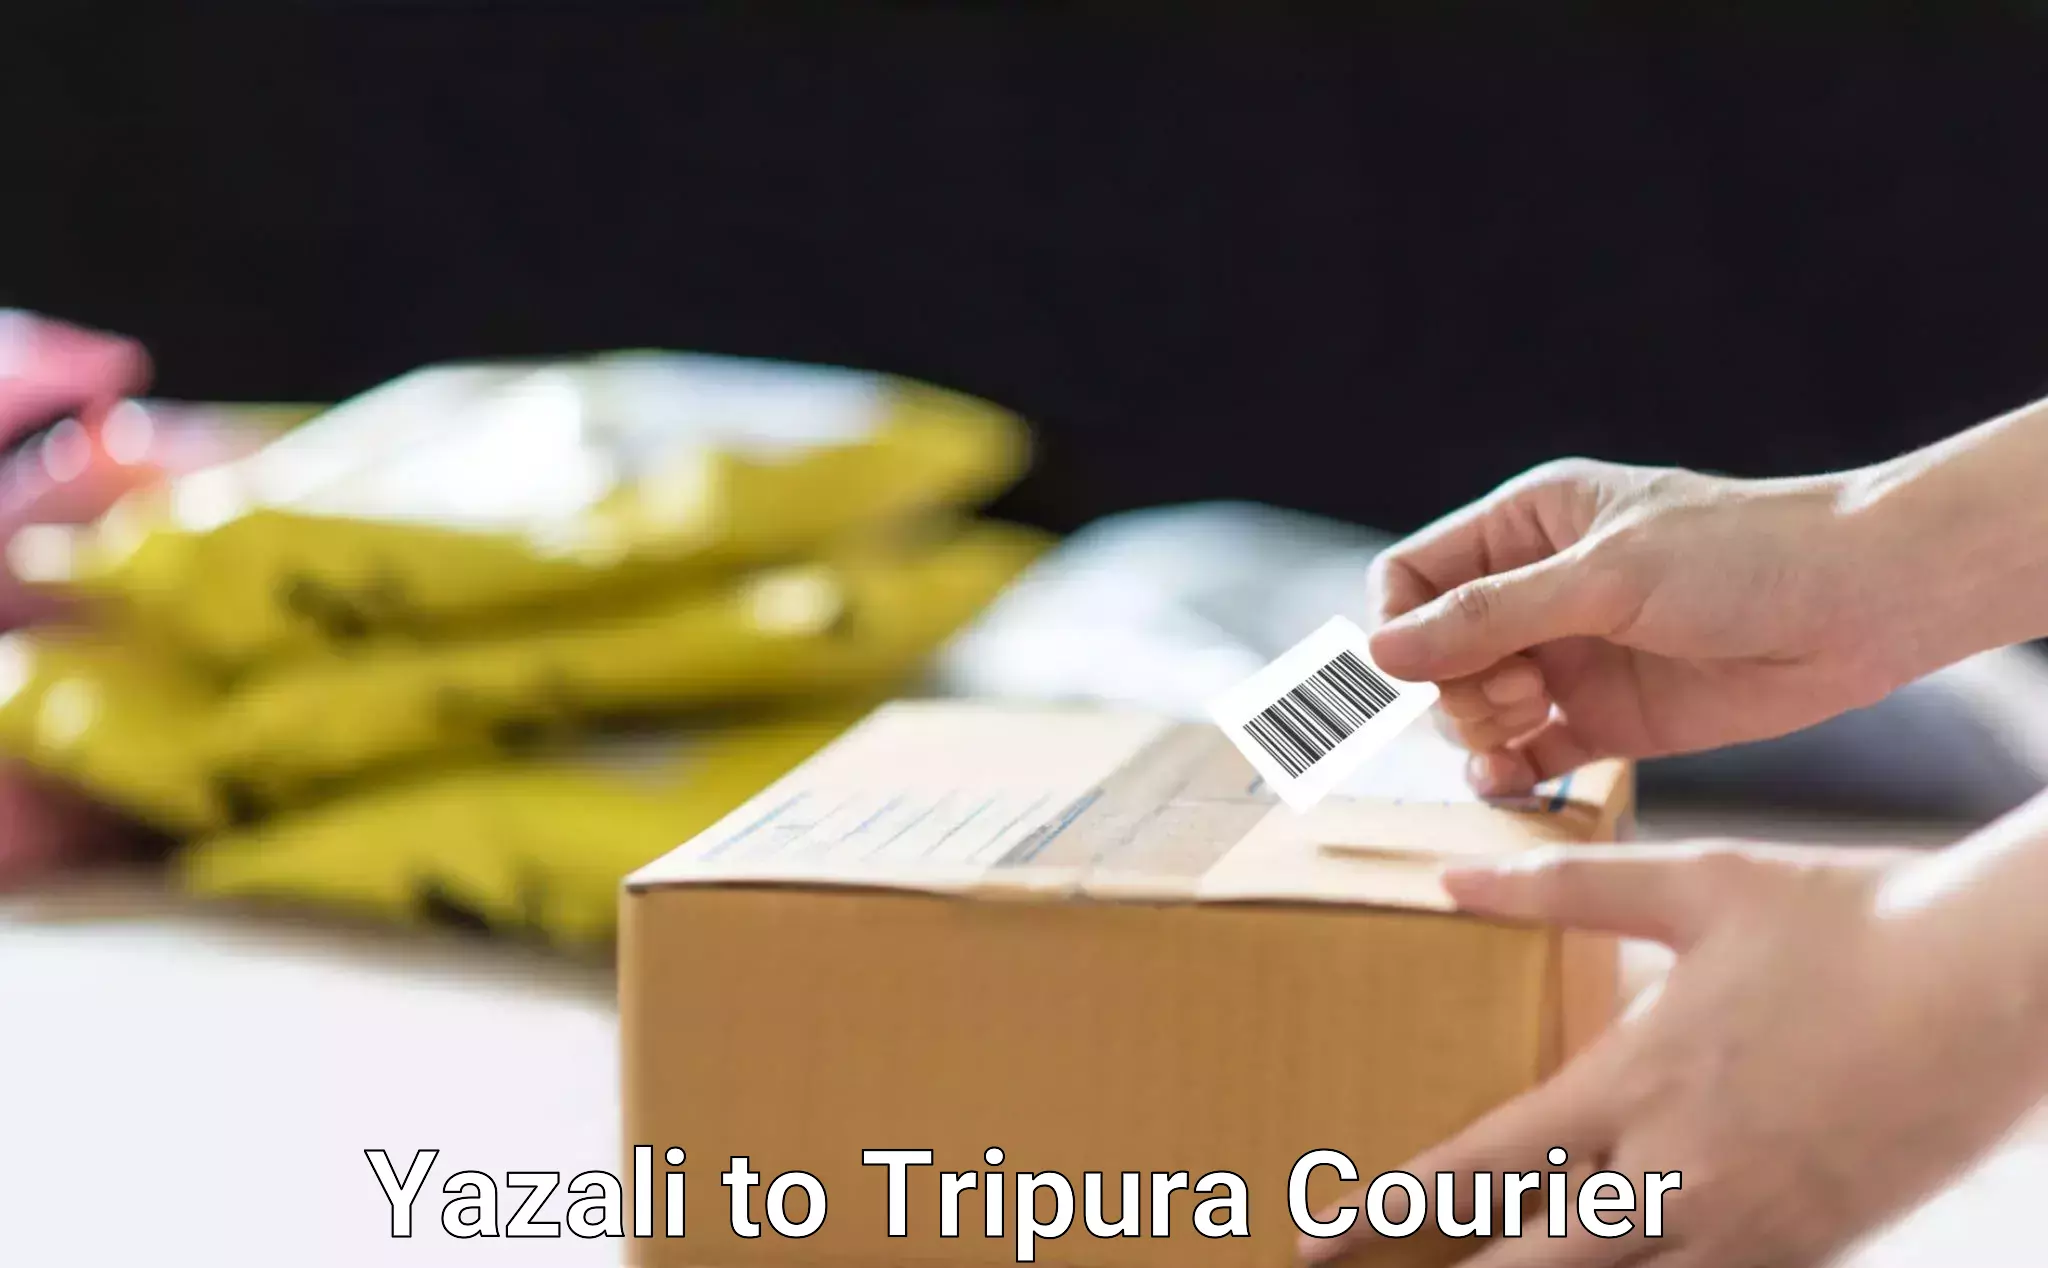 On-call courier service Yazali to Udaipur Tripura